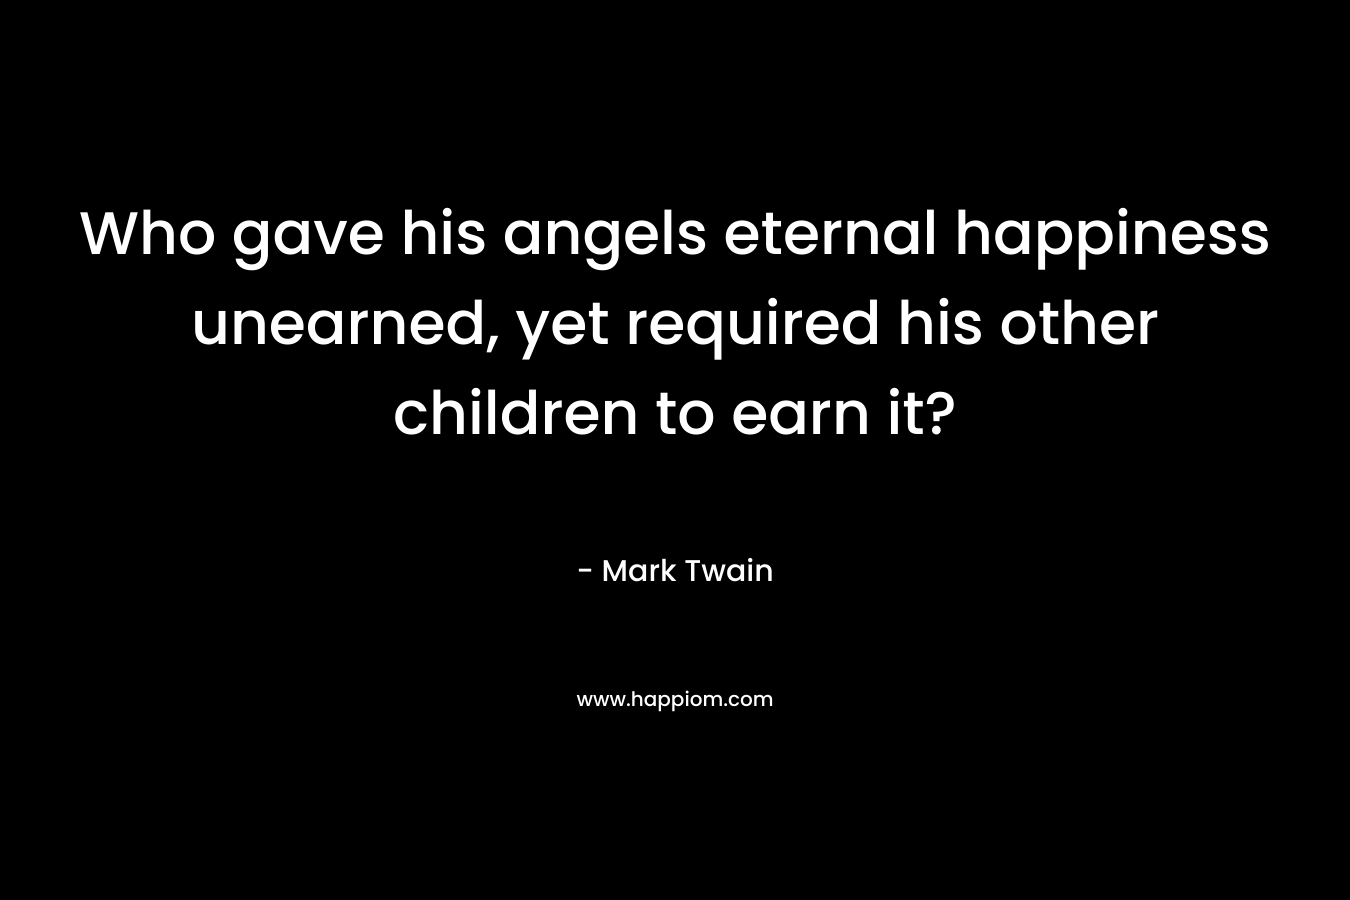 Who gave his angels eternal happiness unearned, yet required his other children to earn it?